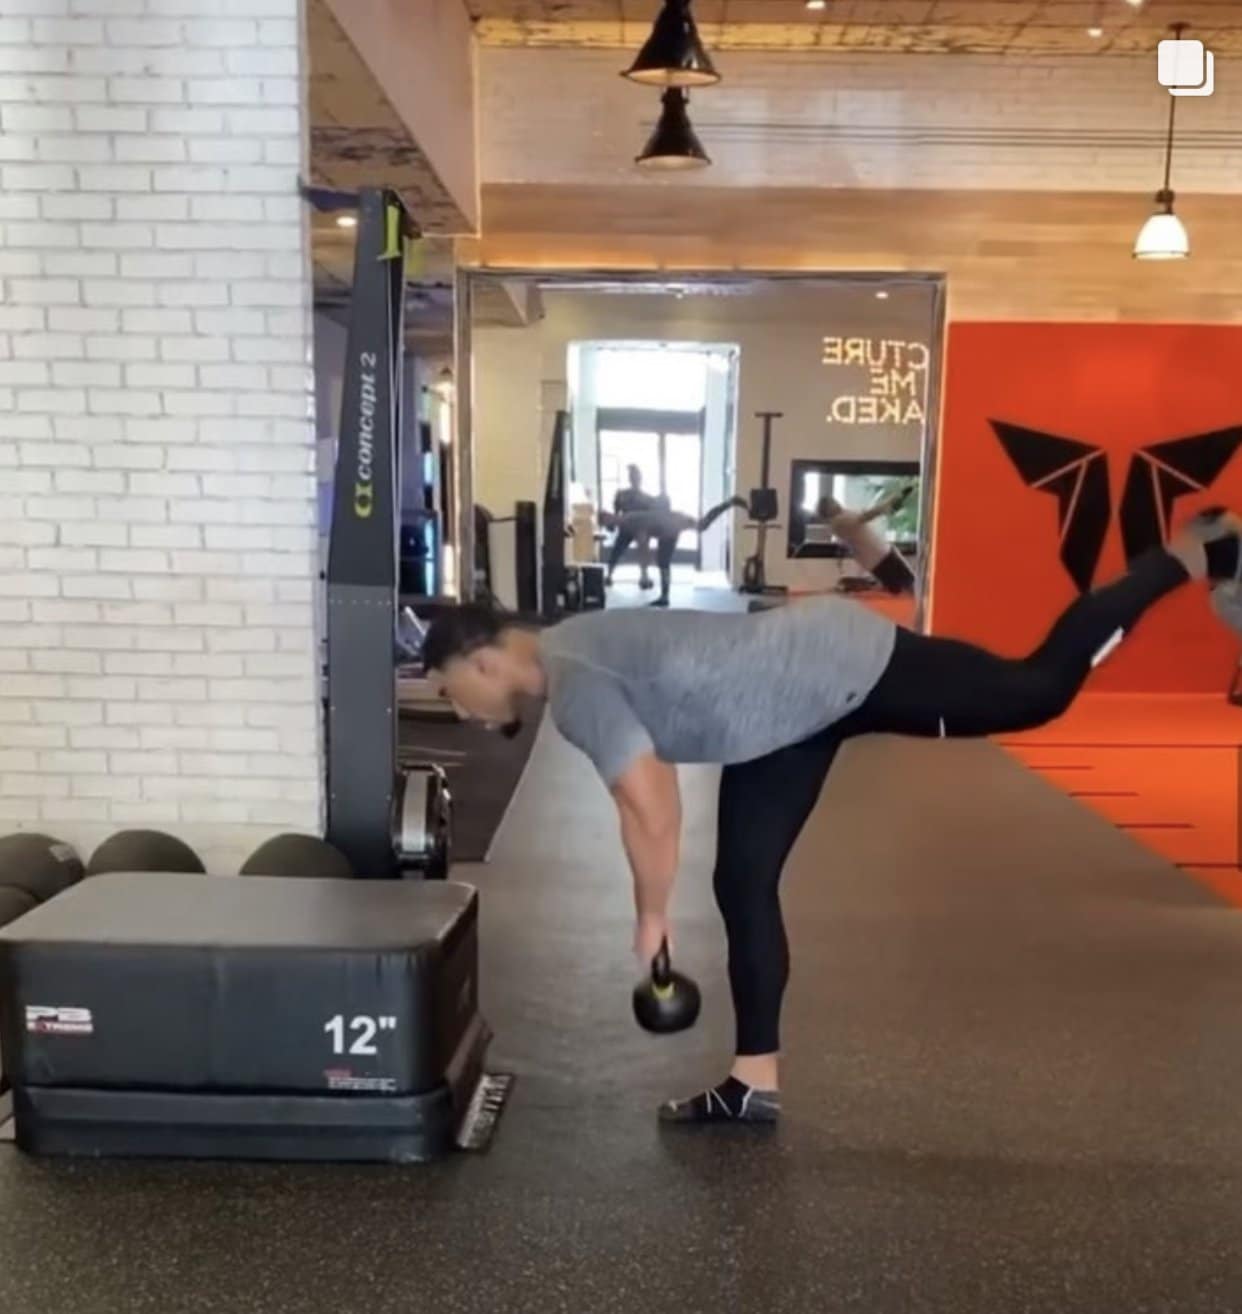 Three Kettlebell Moves for Building Your Mind & Muscle - Workout Wednesday #49